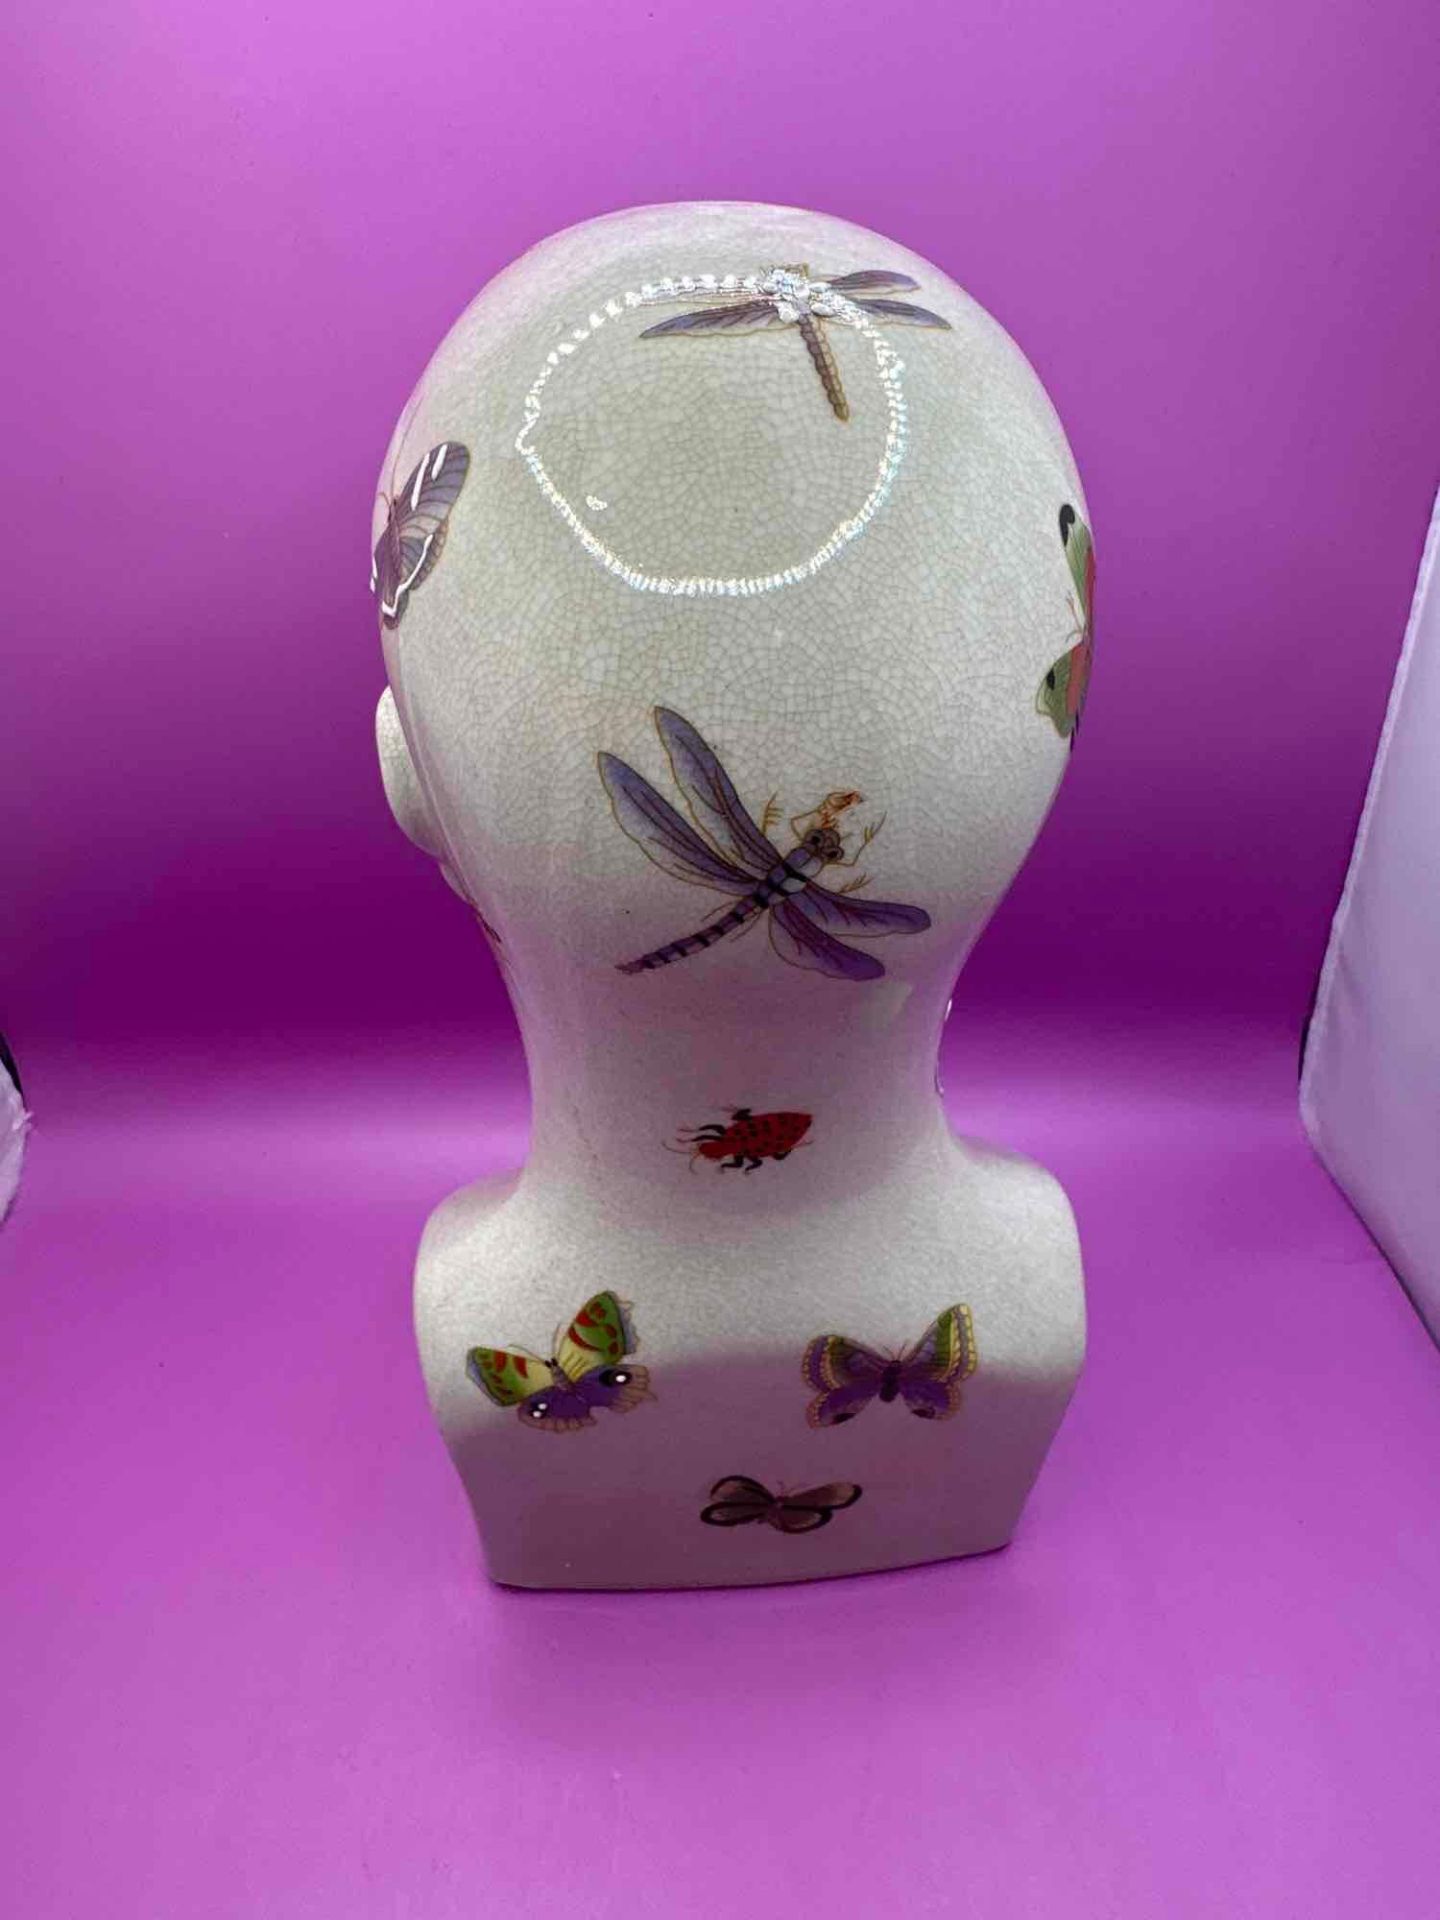 Ceramic Phrenology Head Adorned With A Colourful Colony Of Winged Insects: Bees, Butterflies, - Image 3 of 4